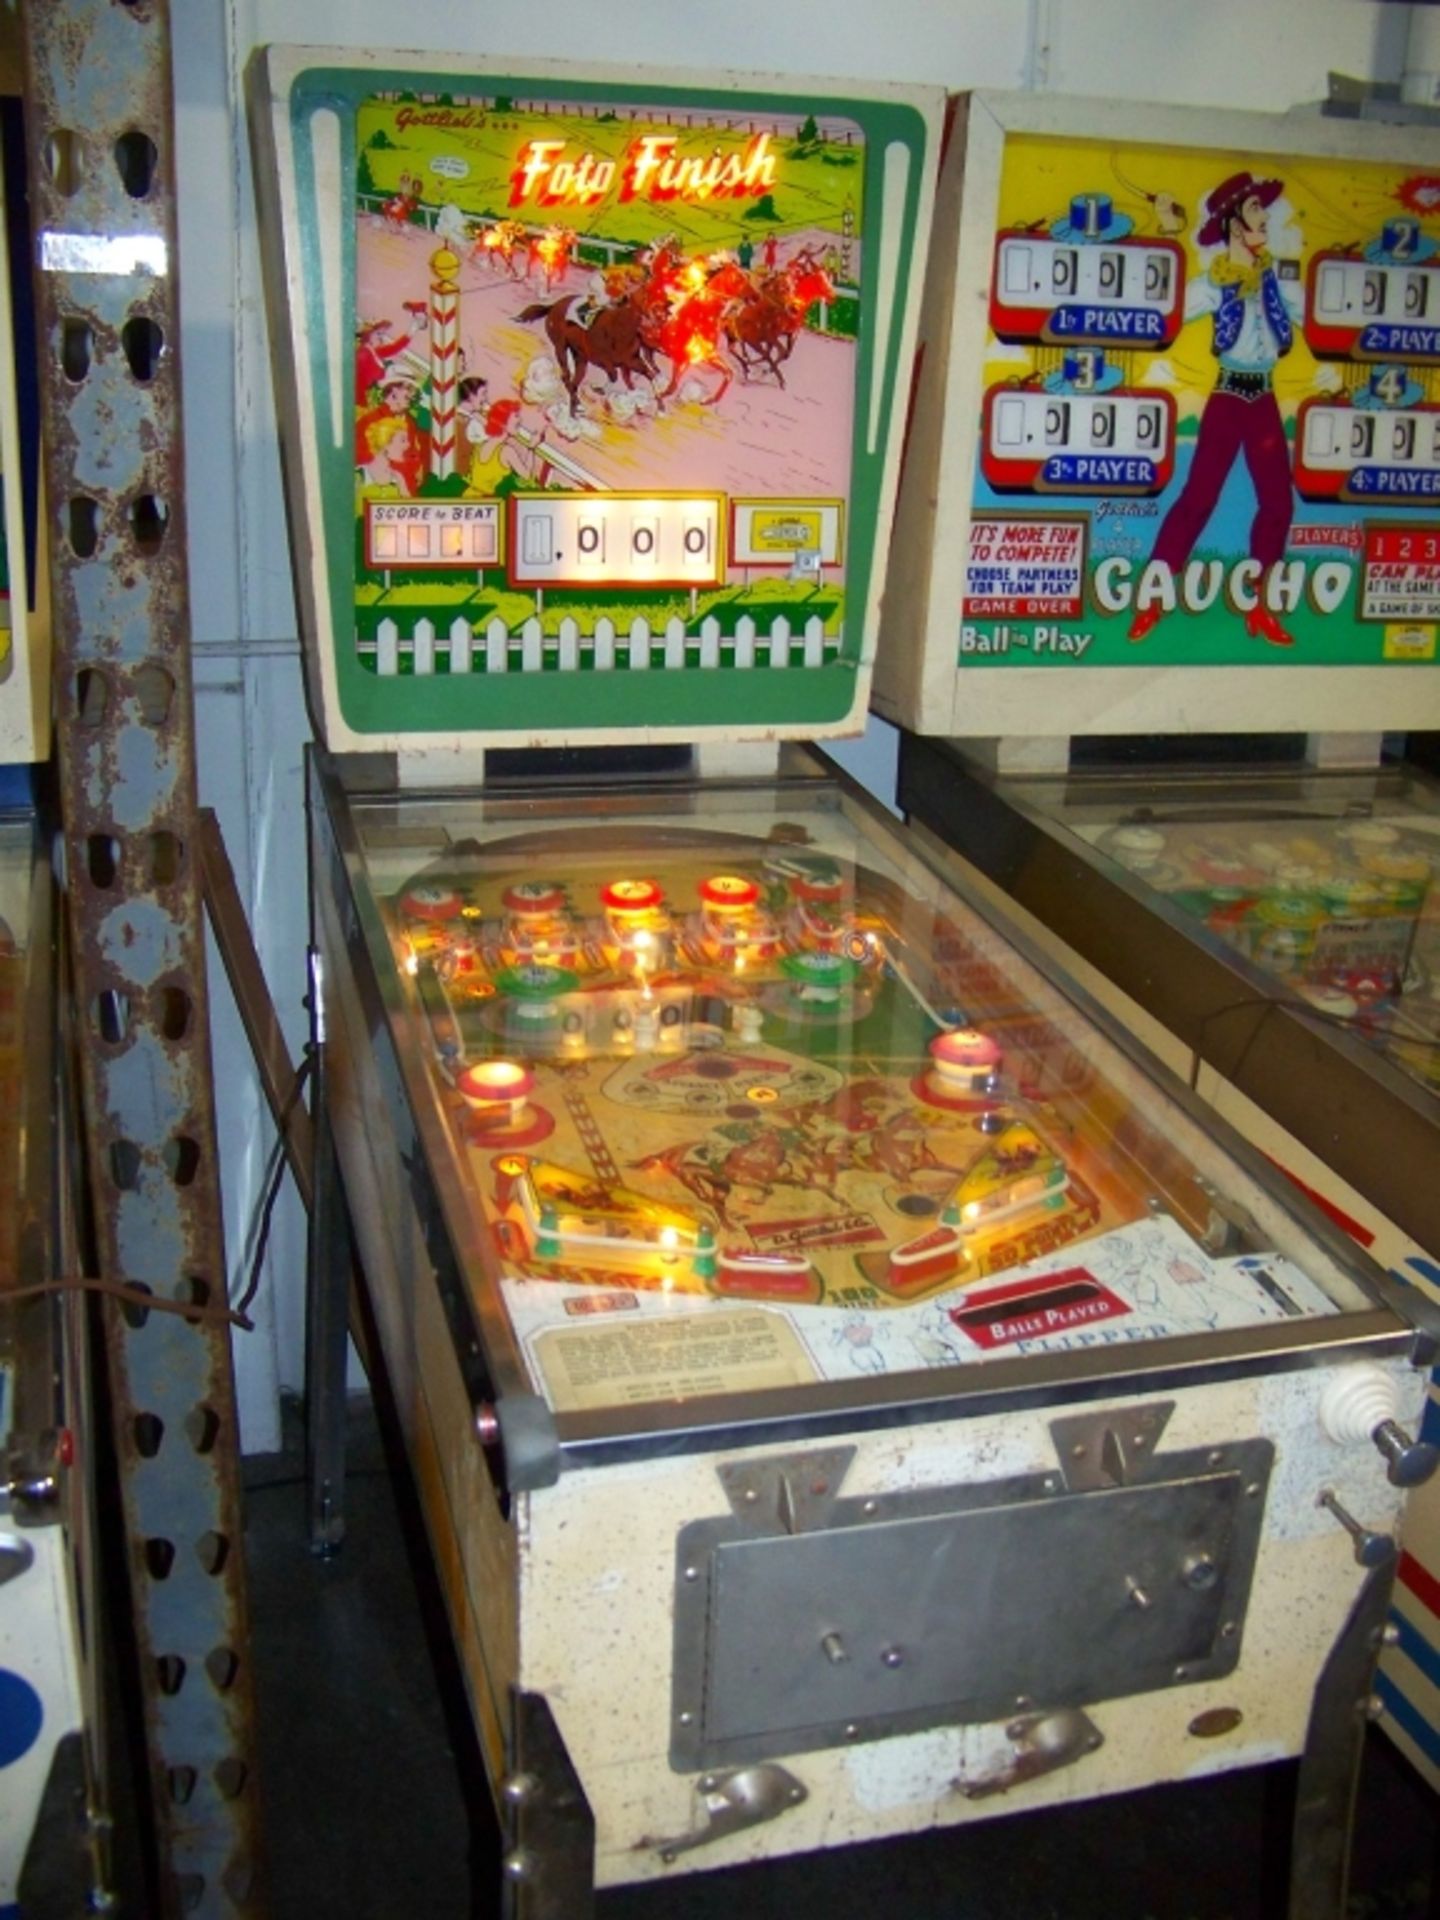 FOTO FINISH PINBALL MACHINE GOTTLIEB 1961 Item is in used condition. Evidence of wear and commercial - Image 2 of 7